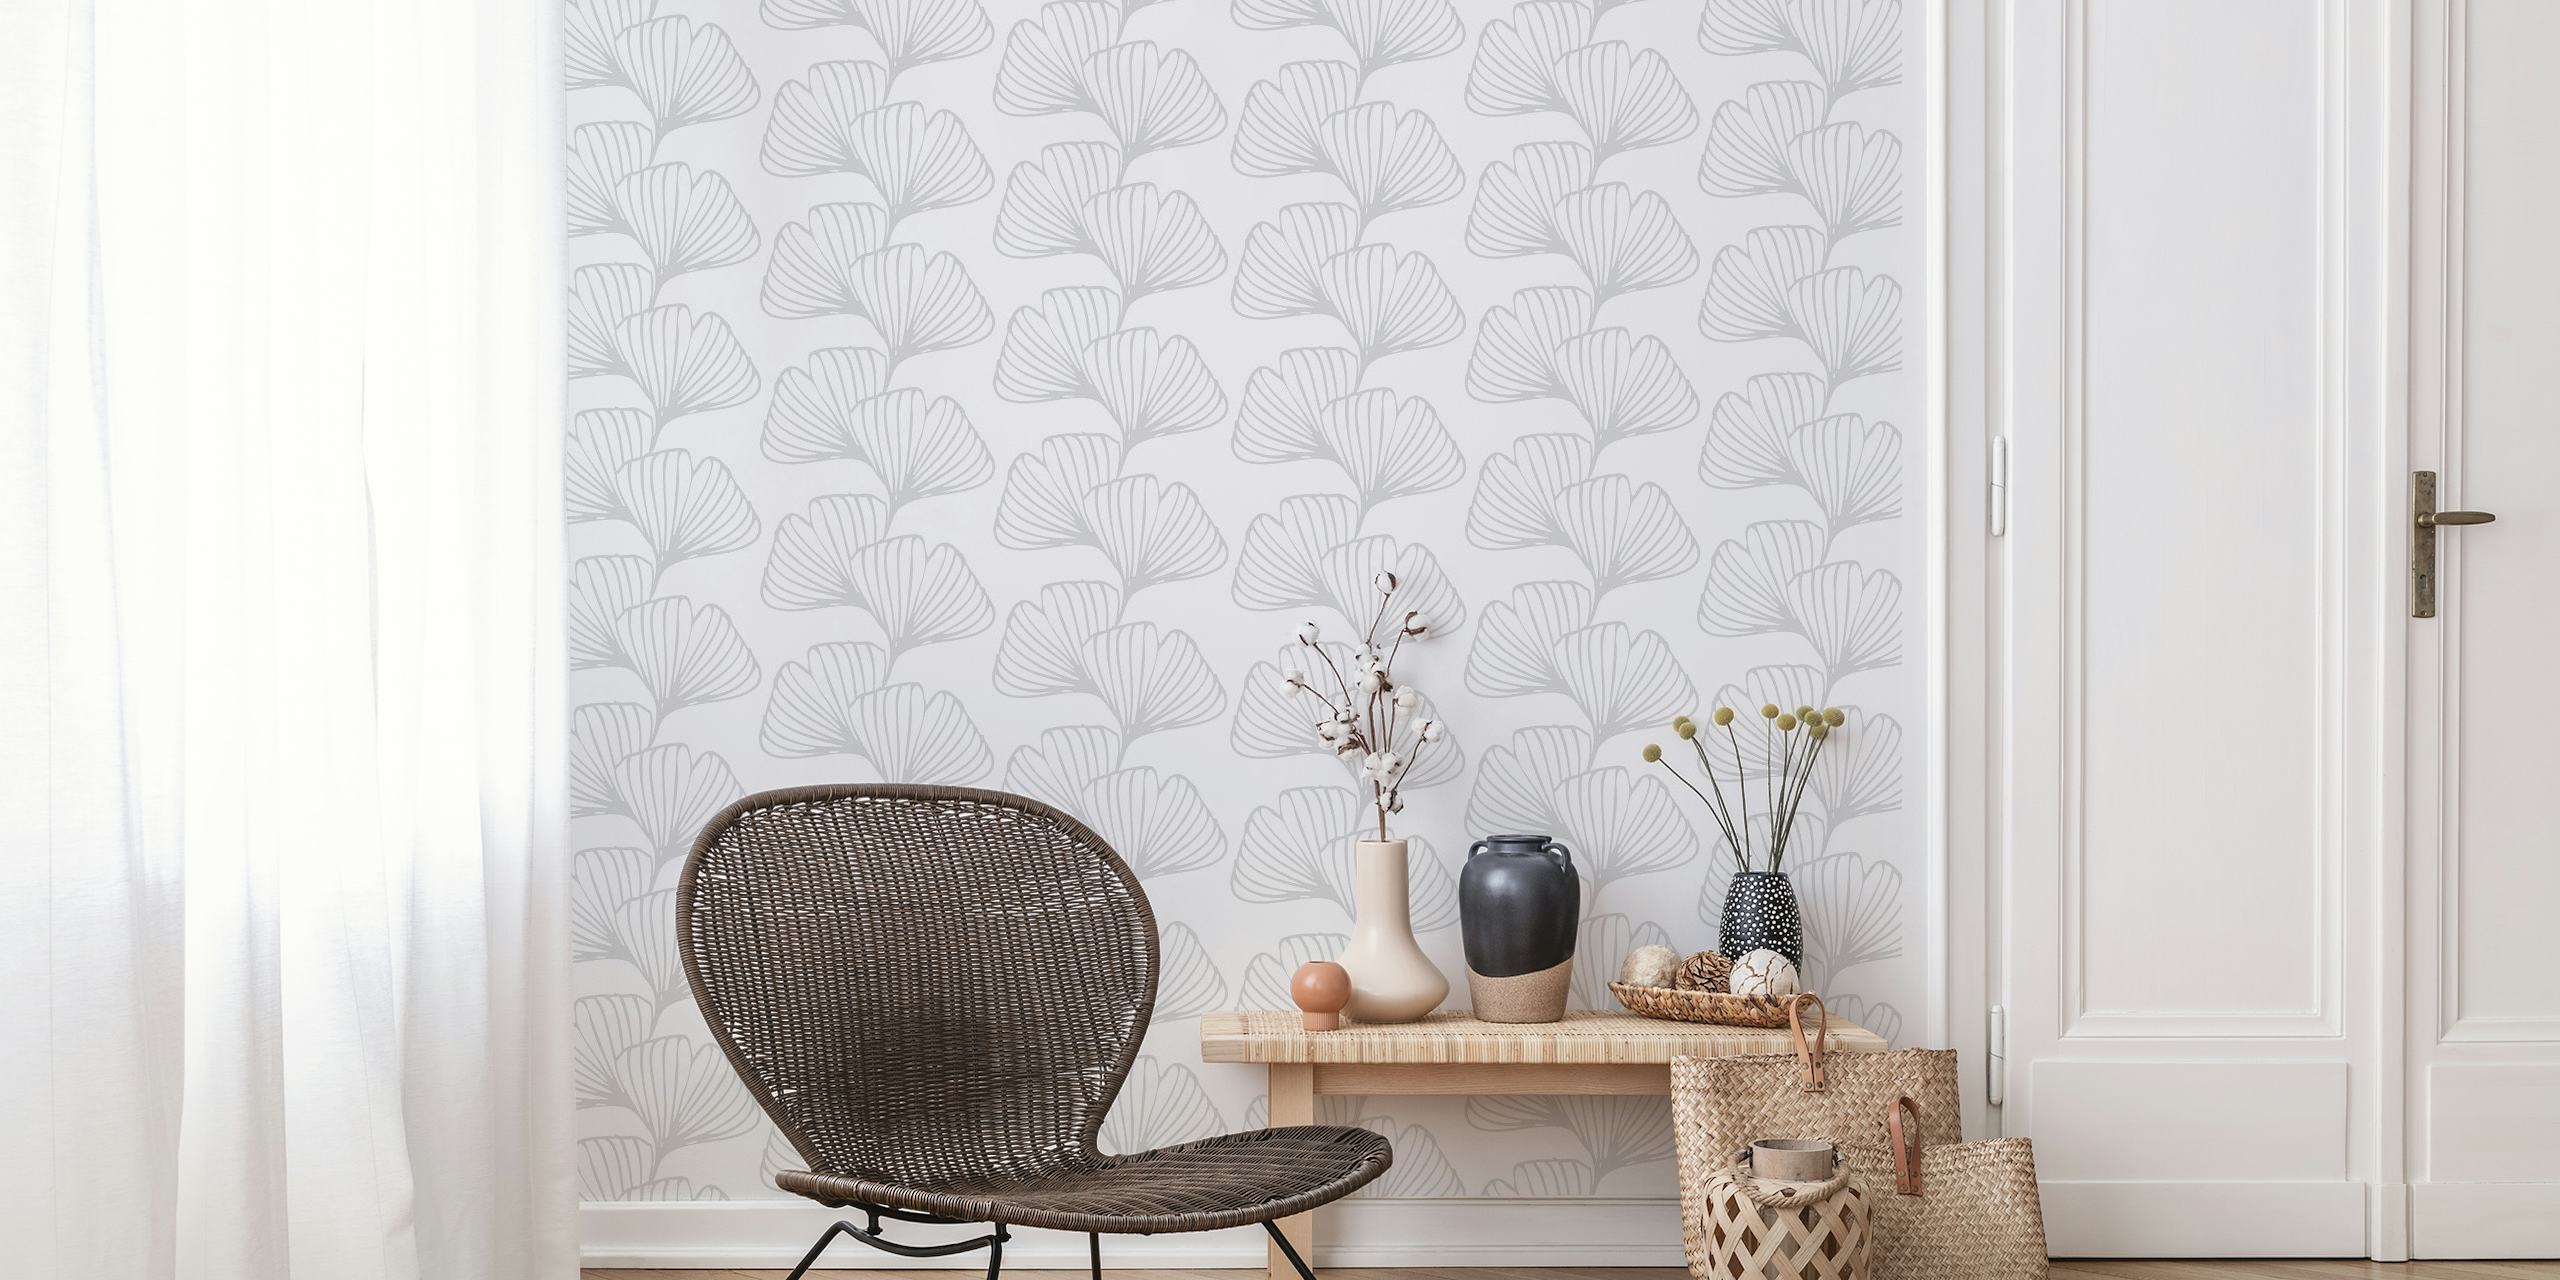 Ginkgo leaf pattern wall mural in subdued hues for interior decor